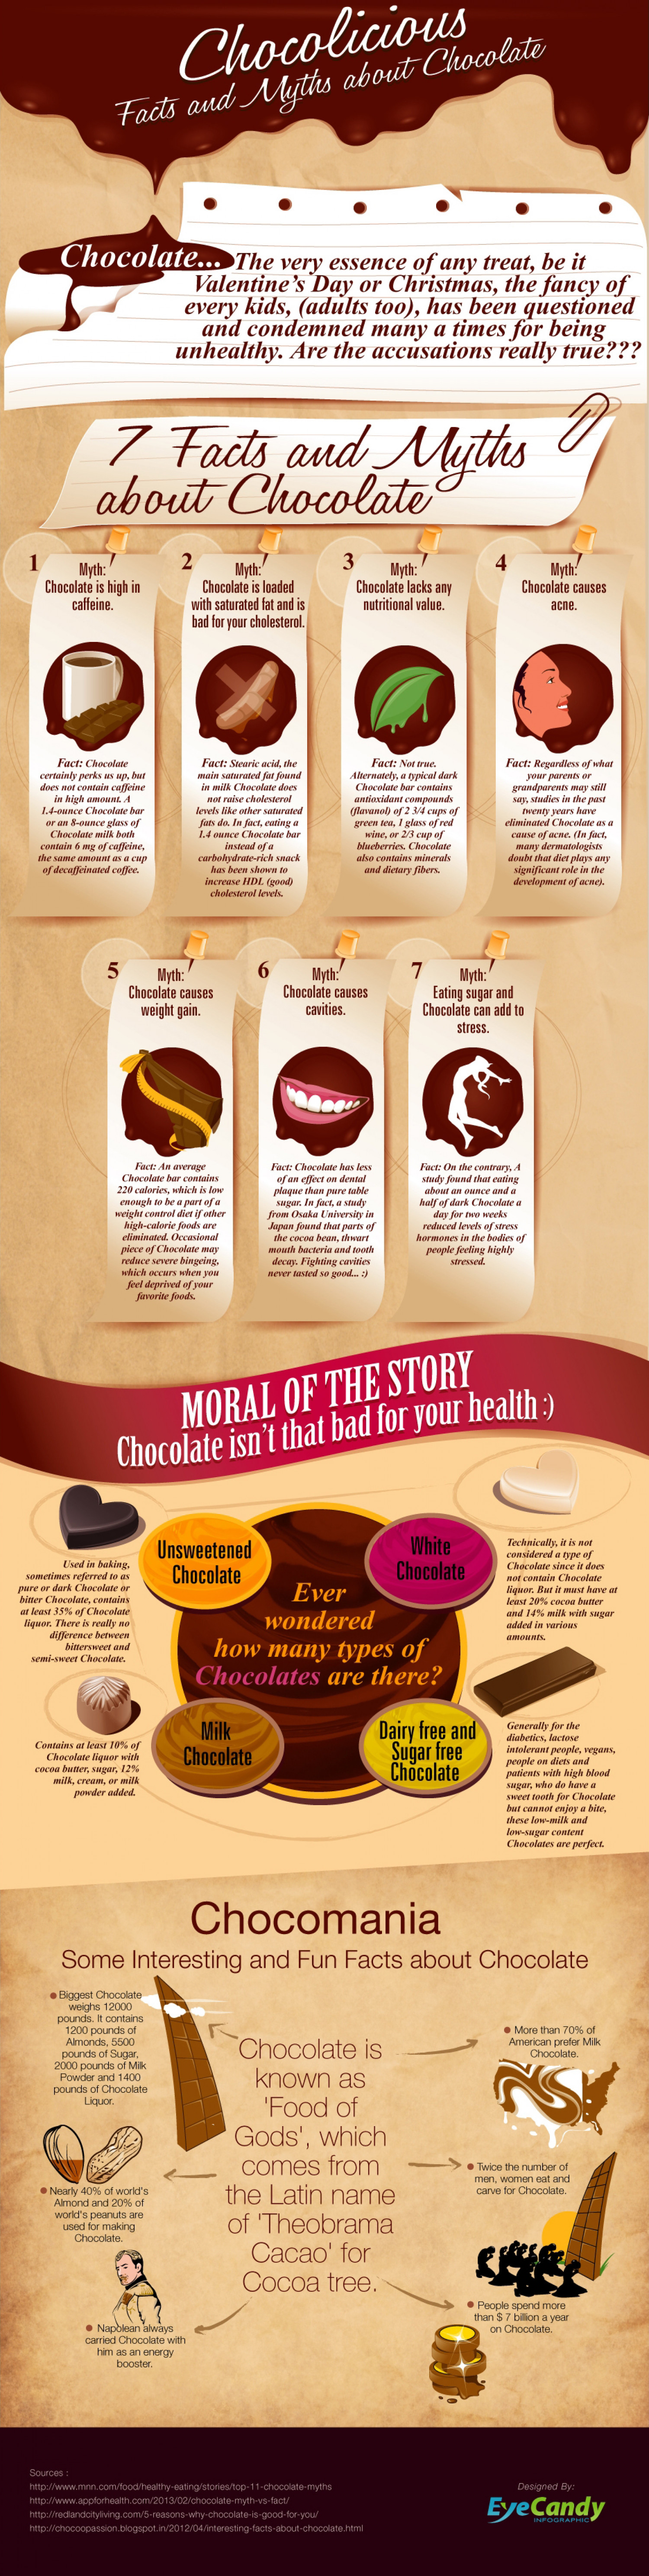 Chocolicious - Facts and Myths about Chocolate Infographic